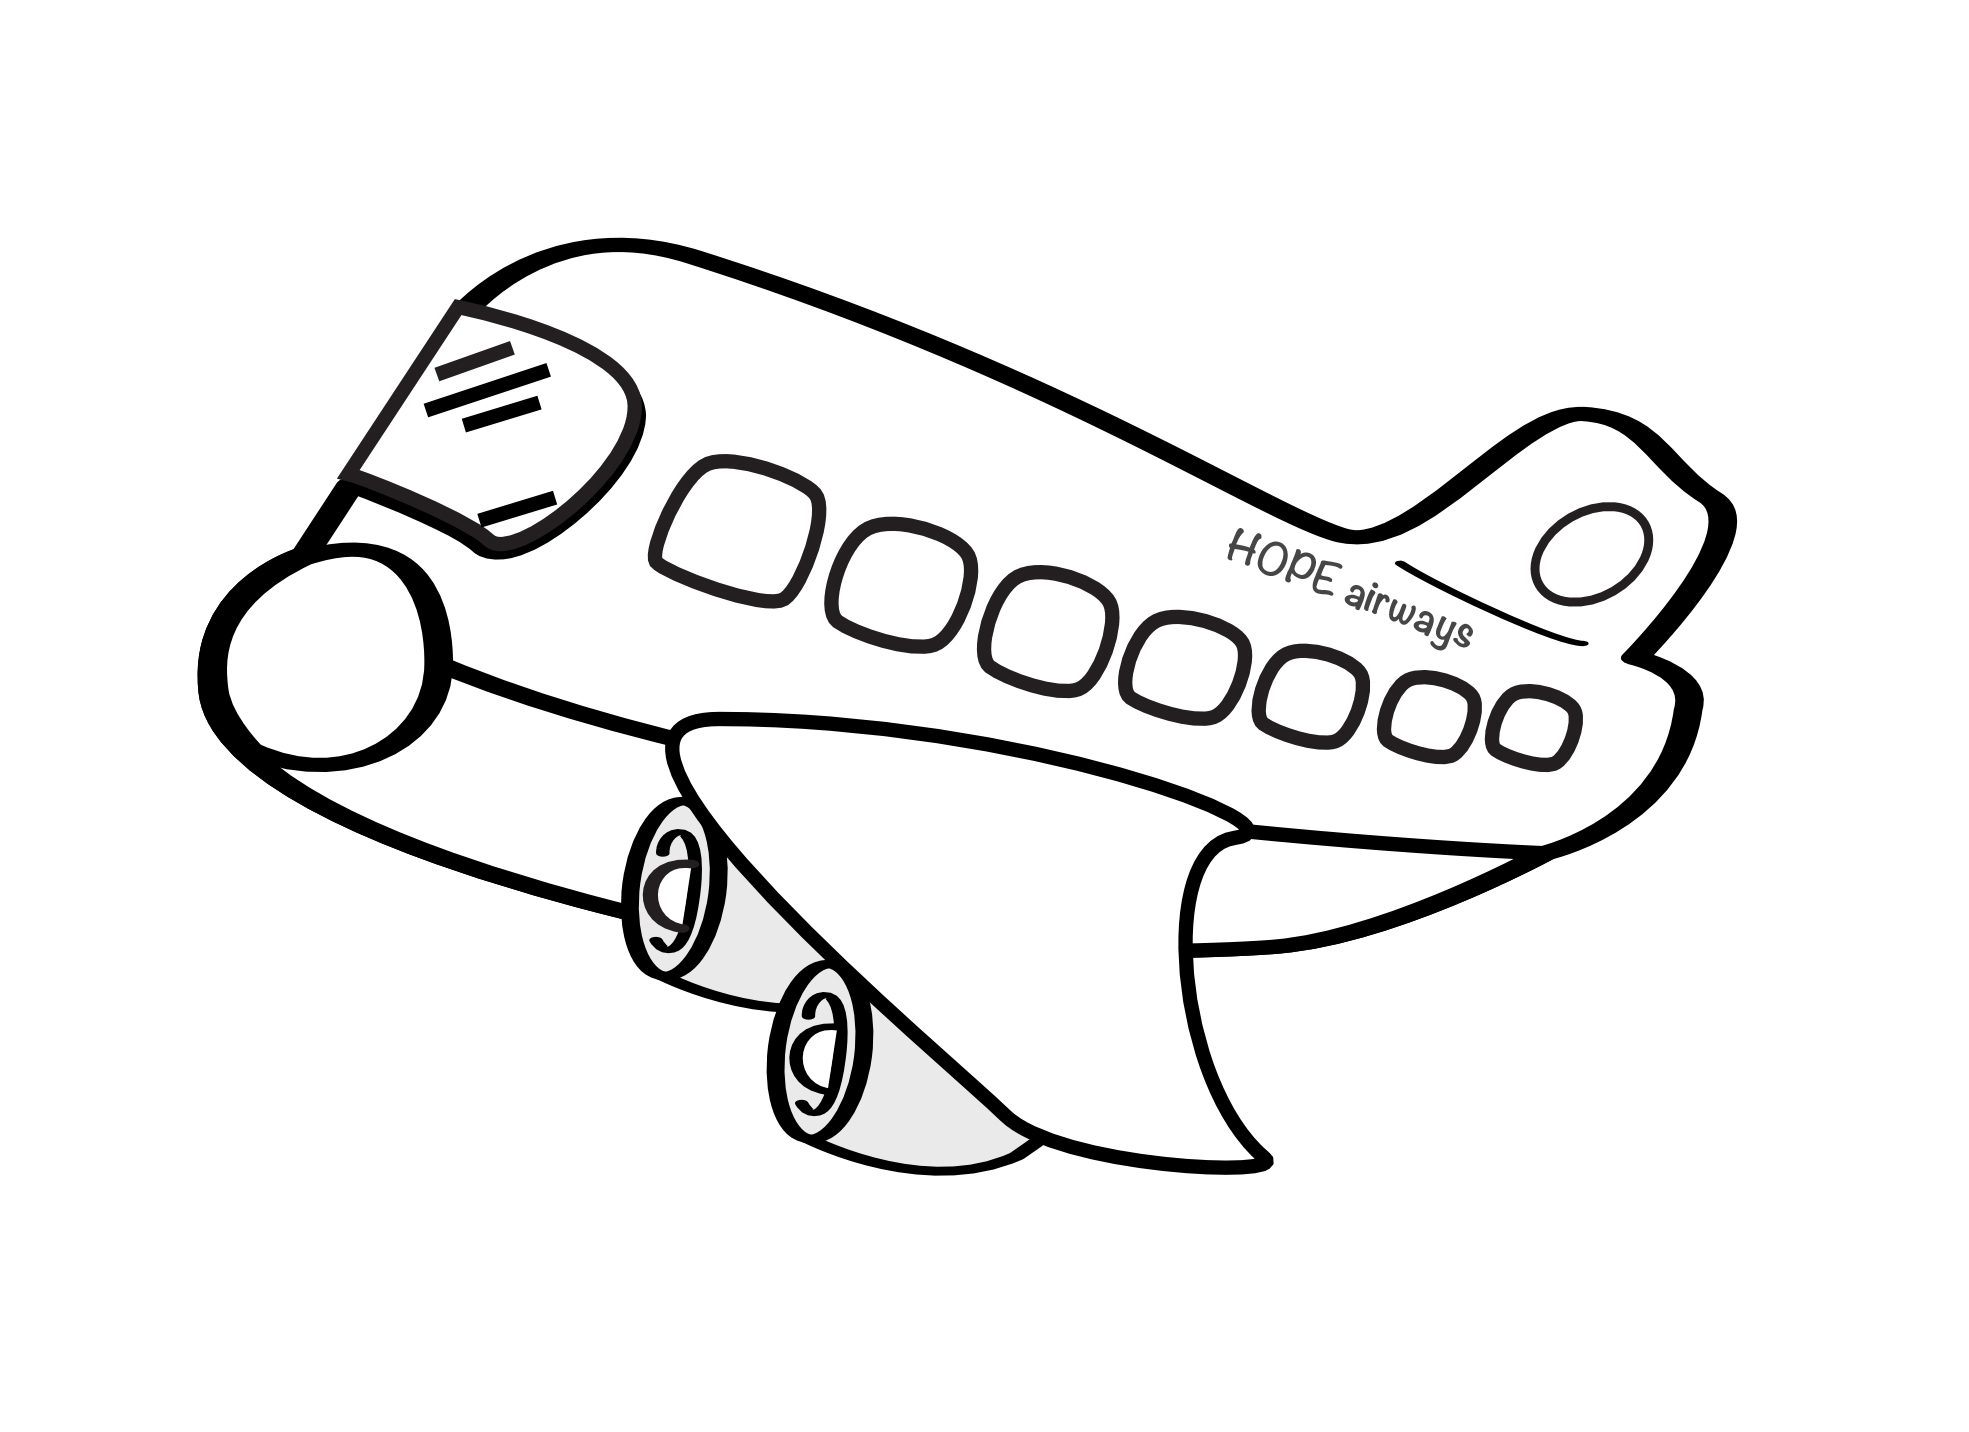 How to draw a simple small airplane - vsafabric